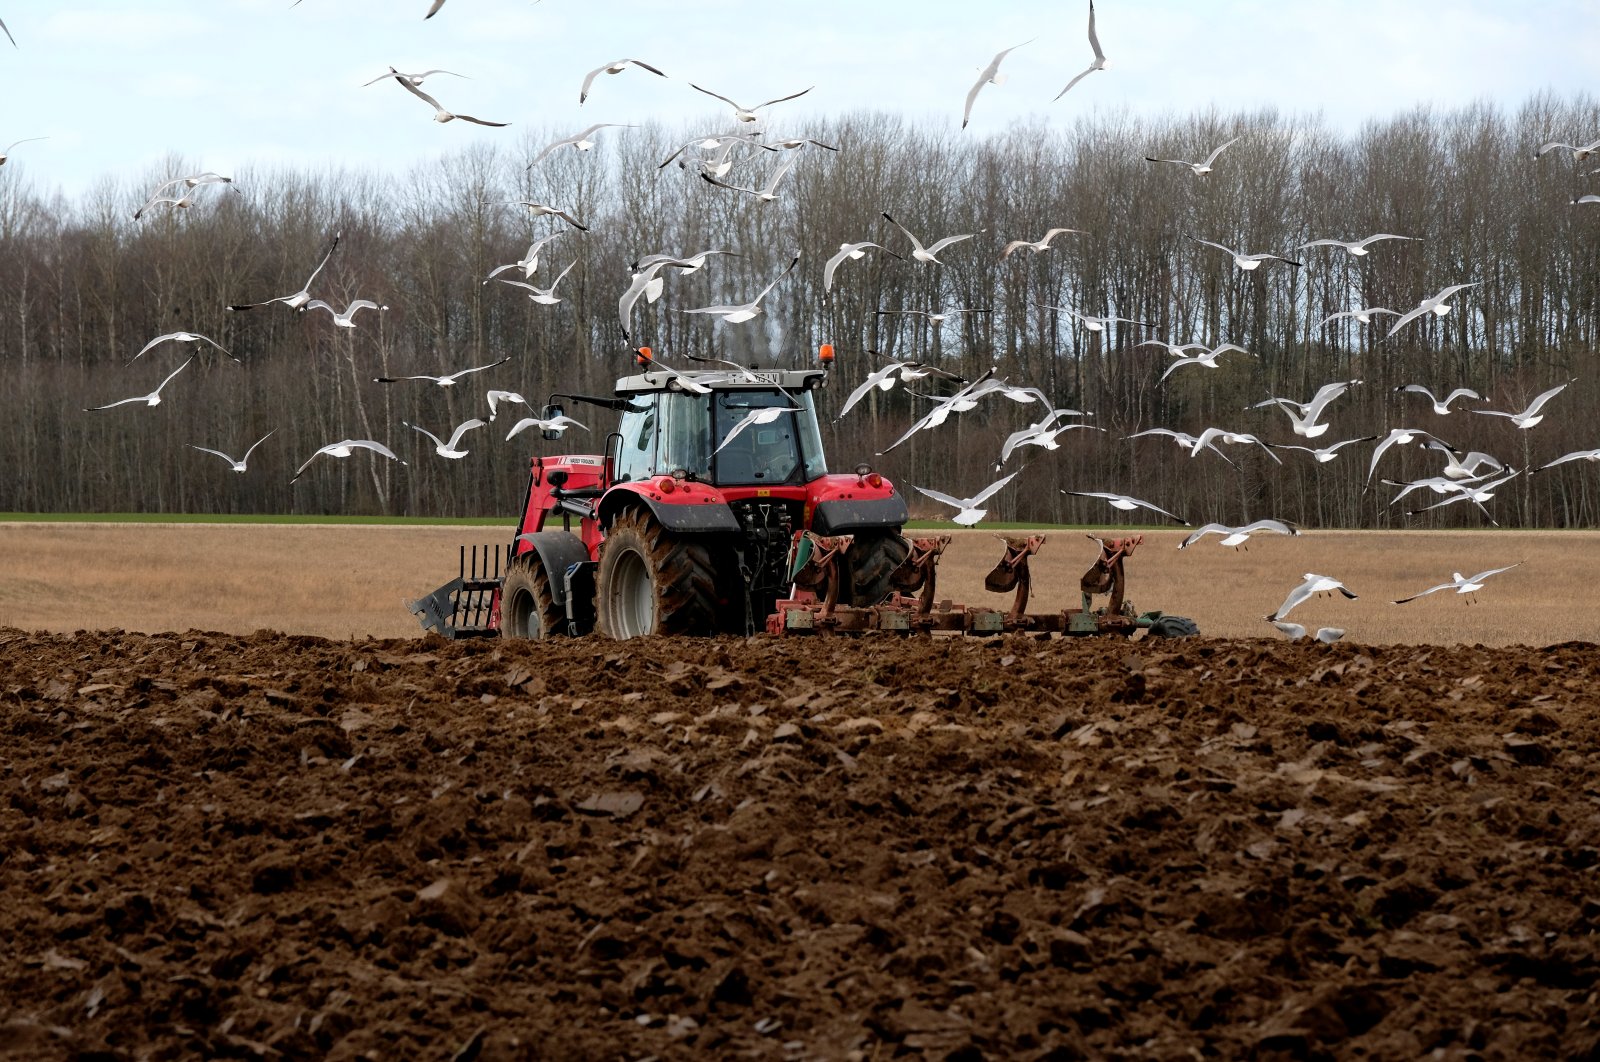 Seagulls take flight as a farmer plows a field in Liepupe, Latvia, Friday, April 3, 2020. (Reuters Photo)